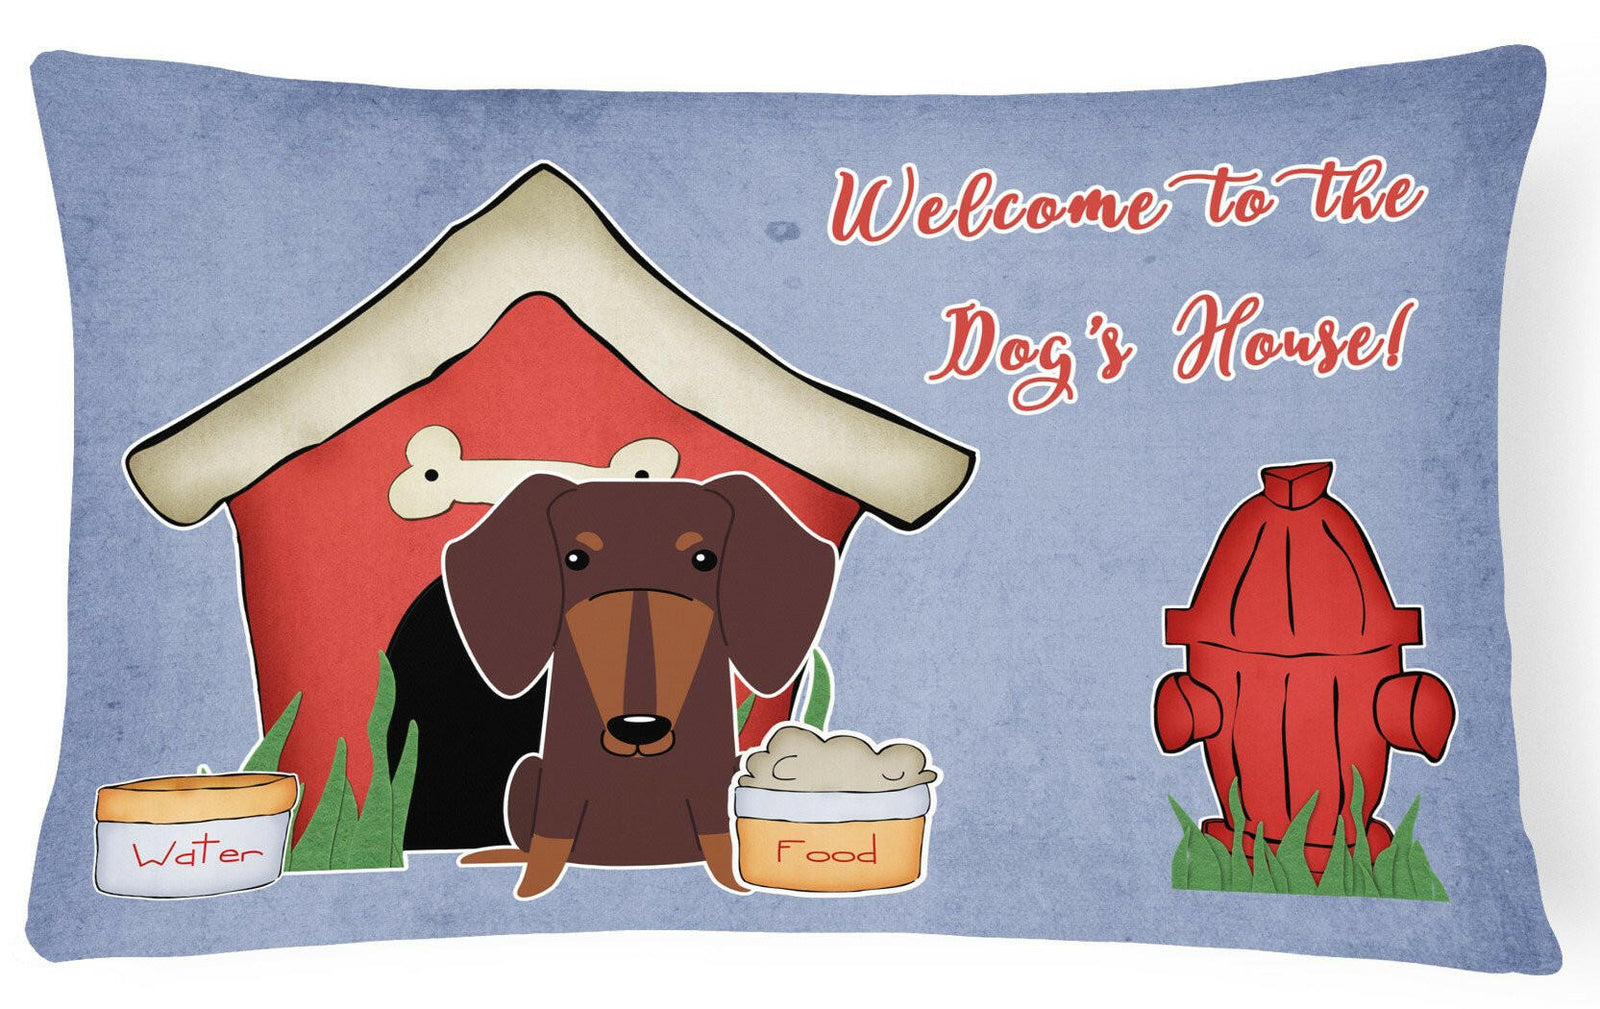 Dog House Collection Dachshund Chocolate Canvas Fabric Decorative Pillow BB2885PW1216 by Caroline's Treasures